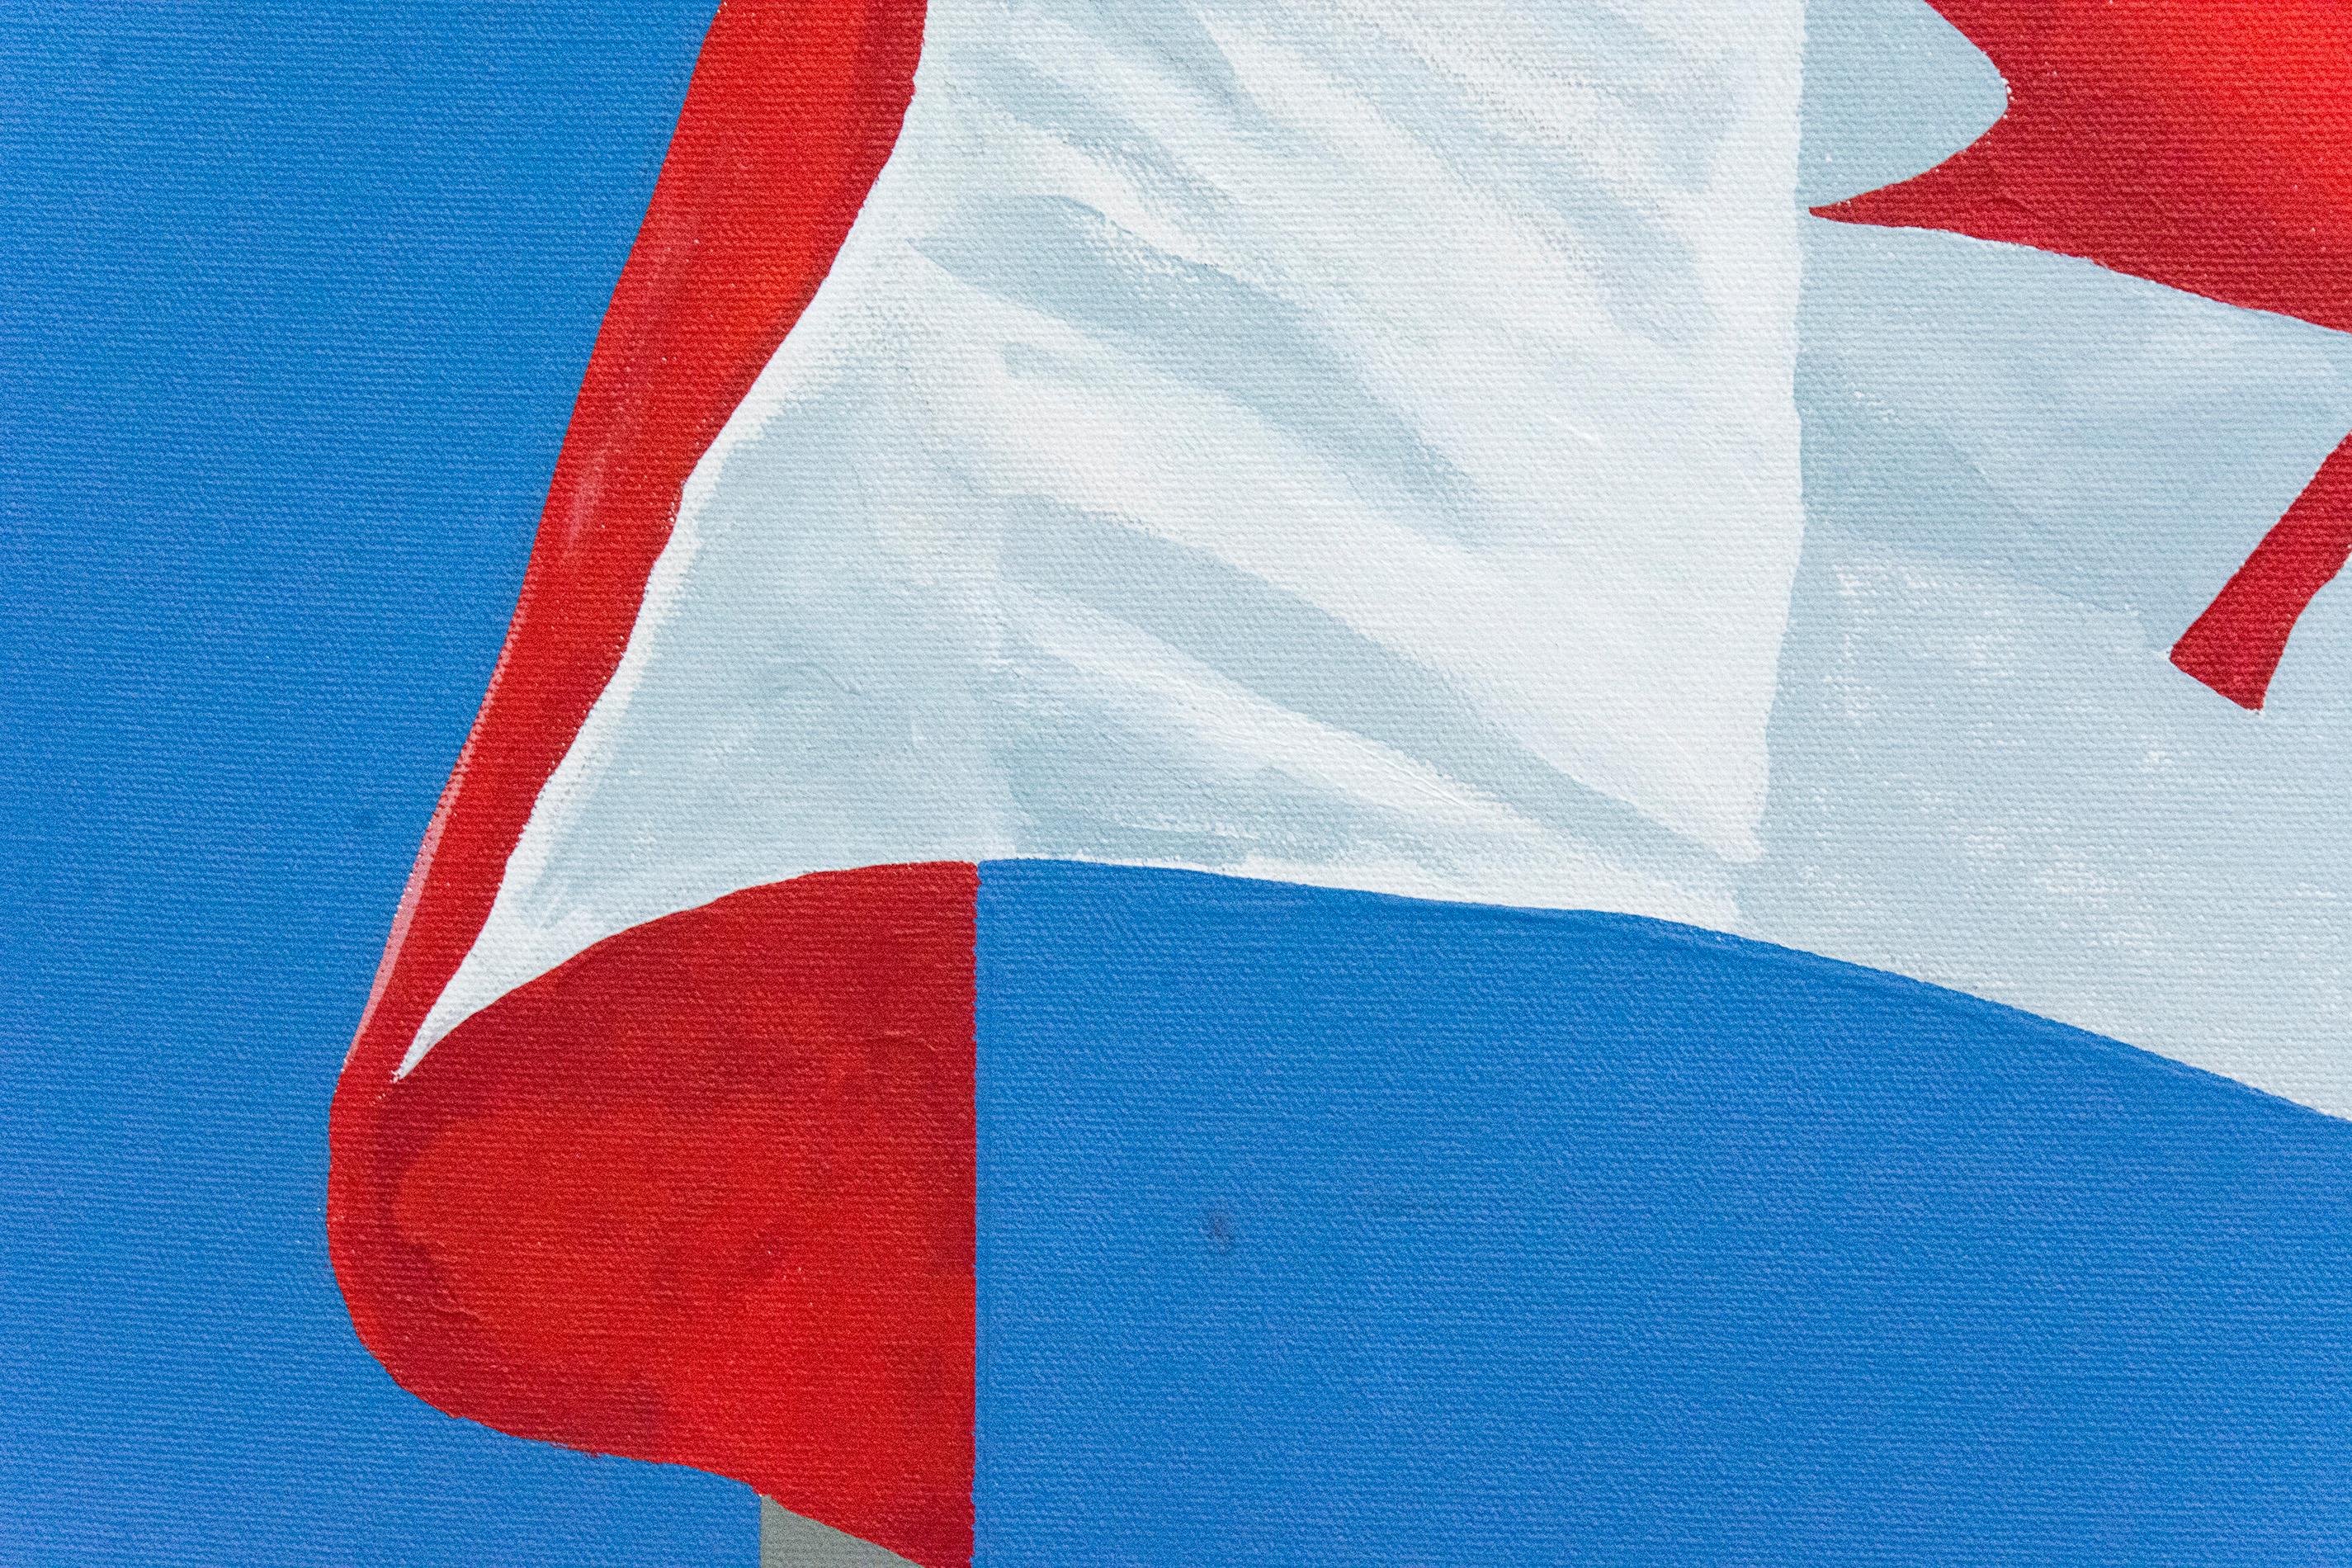 The Painted Flag - Painting by Charles Pachter